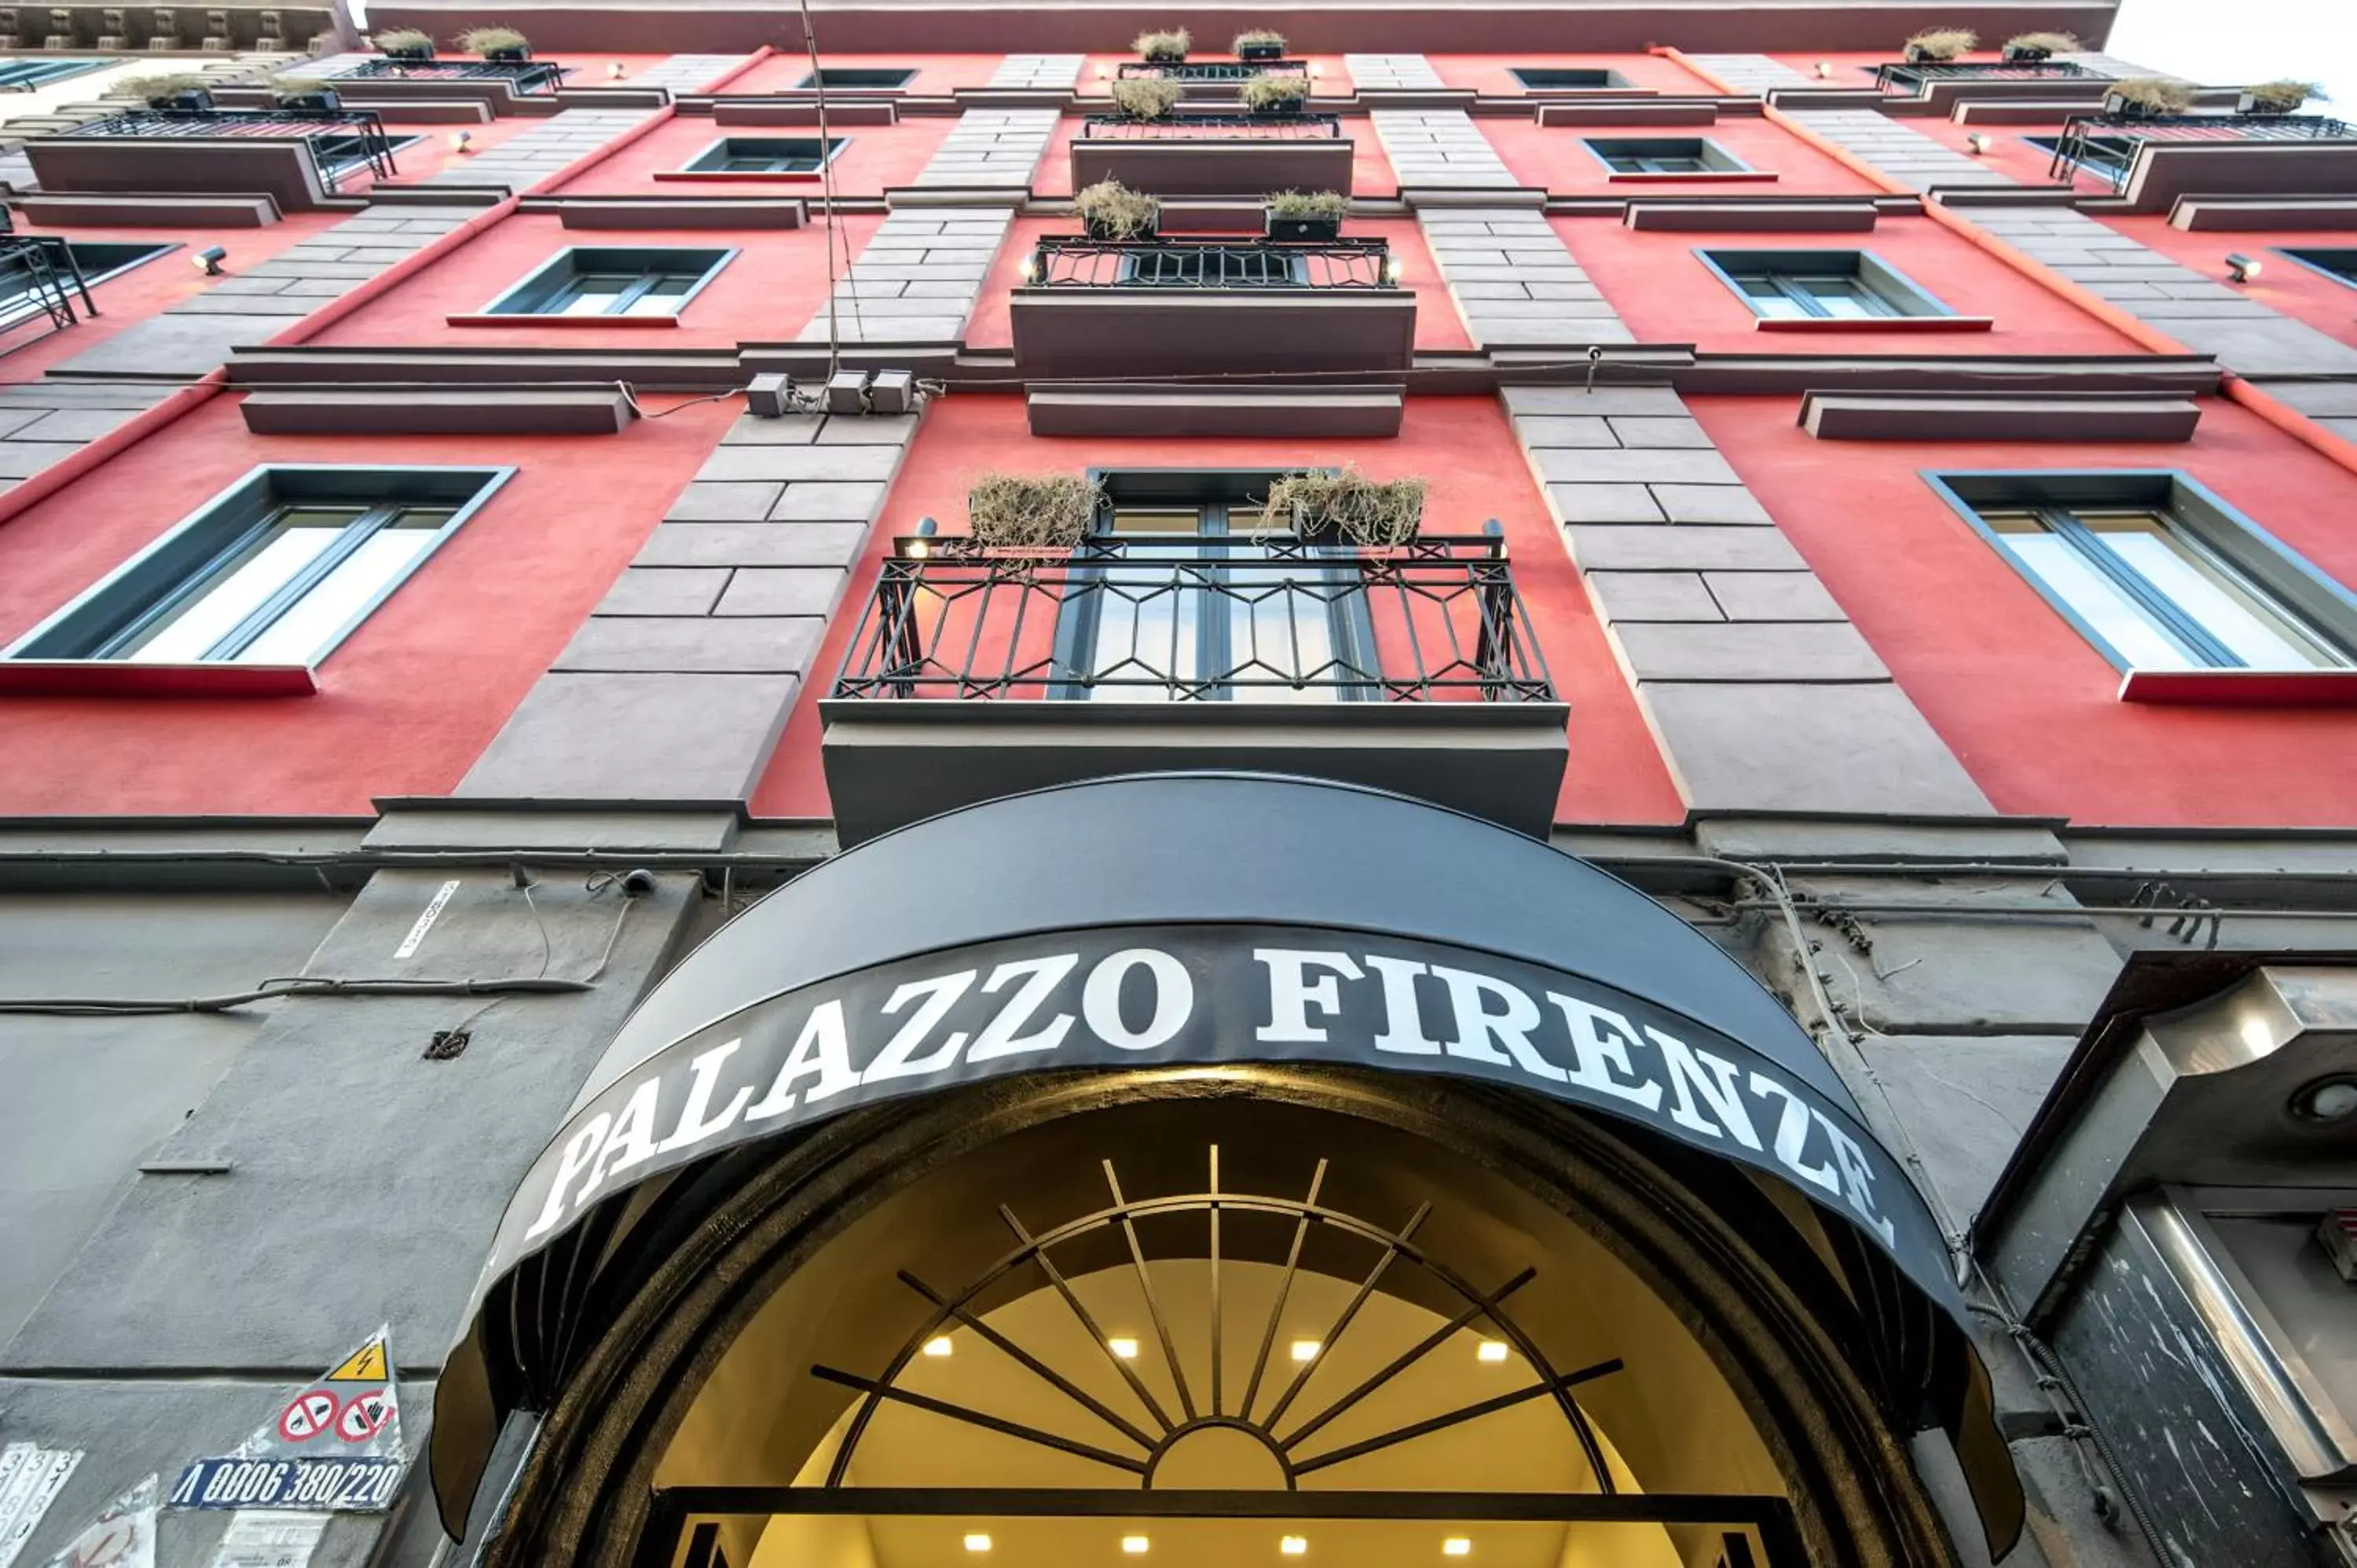 Property Building in Palazzo Firenze